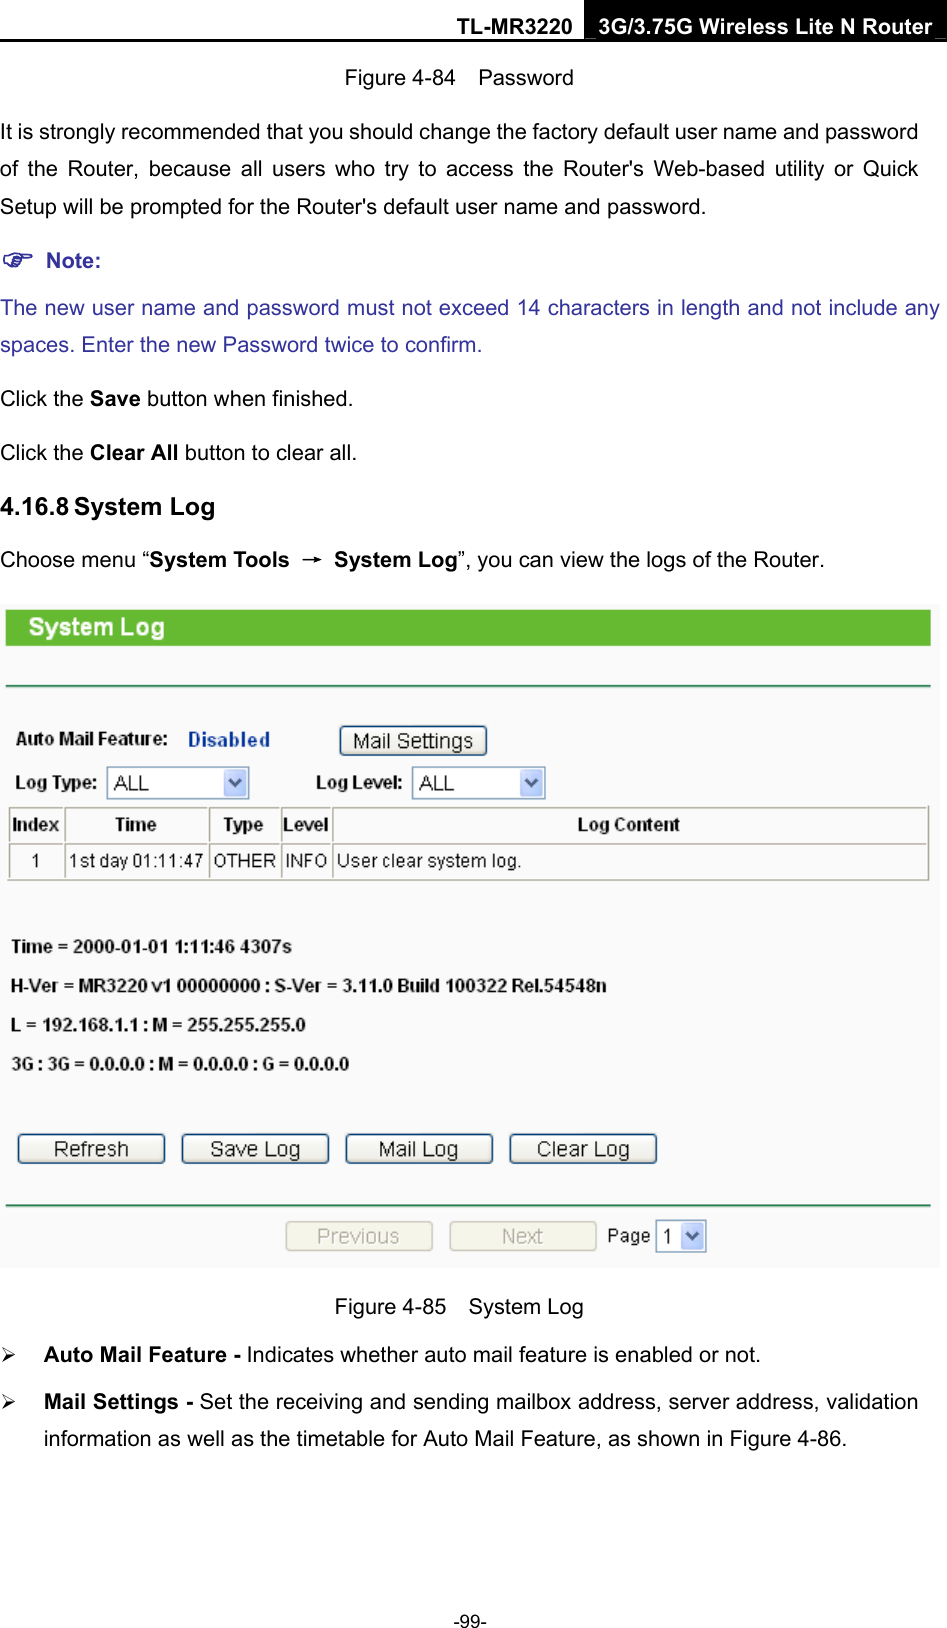 TL-MR3220 3G/3.75G Wireless Lite N Router -99- Figure 4-84  Password It is strongly recommended that you should change the factory default user name and password of the Router, because all users who try to access the Router&apos;s Web-based utility or Quick Setup will be prompted for the Router&apos;s default user name and password. ) Note: The new user name and password must not exceed 14 characters in length and not include any spaces. Enter the new Password twice to confirm. Click the Save button when finished. Click the Clear All button to clear all. 4.16.8 System Log Choose menu “System Tools  → System Log”, you can view the logs of the Router.  Figure 4-85  System Log ¾ Auto Mail Feature - Indicates whether auto mail feature is enabled or not.   ¾ Mail Settings - Set the receiving and sending mailbox address, server address, validation information as well as the timetable for Auto Mail Feature, as shown in Figure 4-86. 